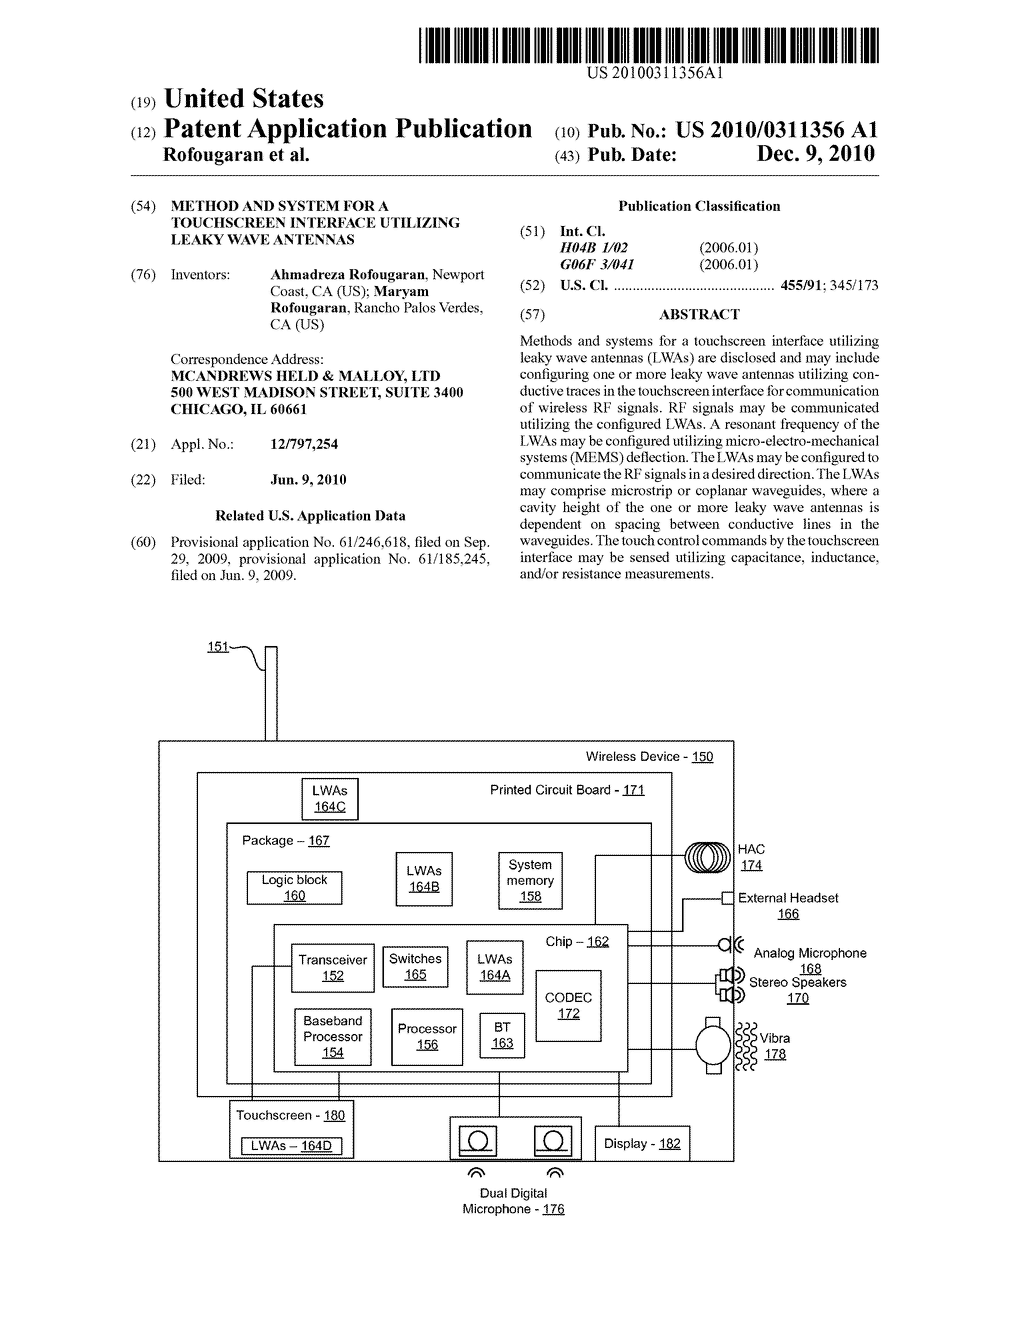 METHOD AND SYSTEM FOR A TOUCHSCREEN INTERFACE UTILIZING LEAKY WAVE ANTENNAS - diagram, schematic, and image 01